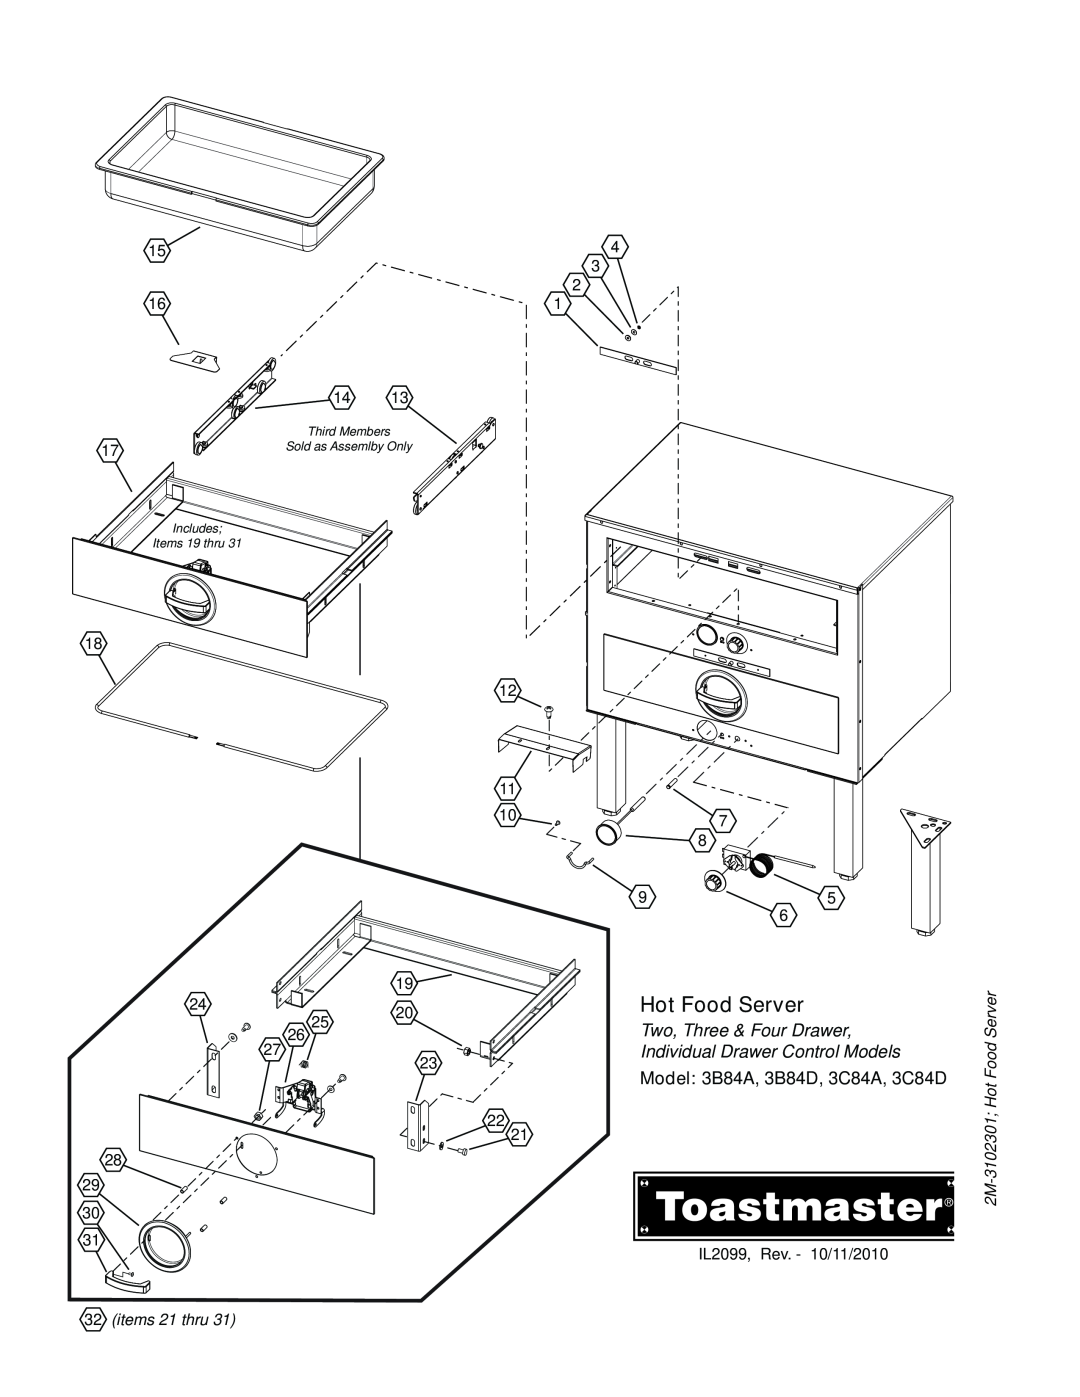 Toastmaster 3B20A, 3C84A manual Hot Food Server, Two, Three & Four Drawer, Individual Drawer Control Models, 4 3 2, 28 29 30 